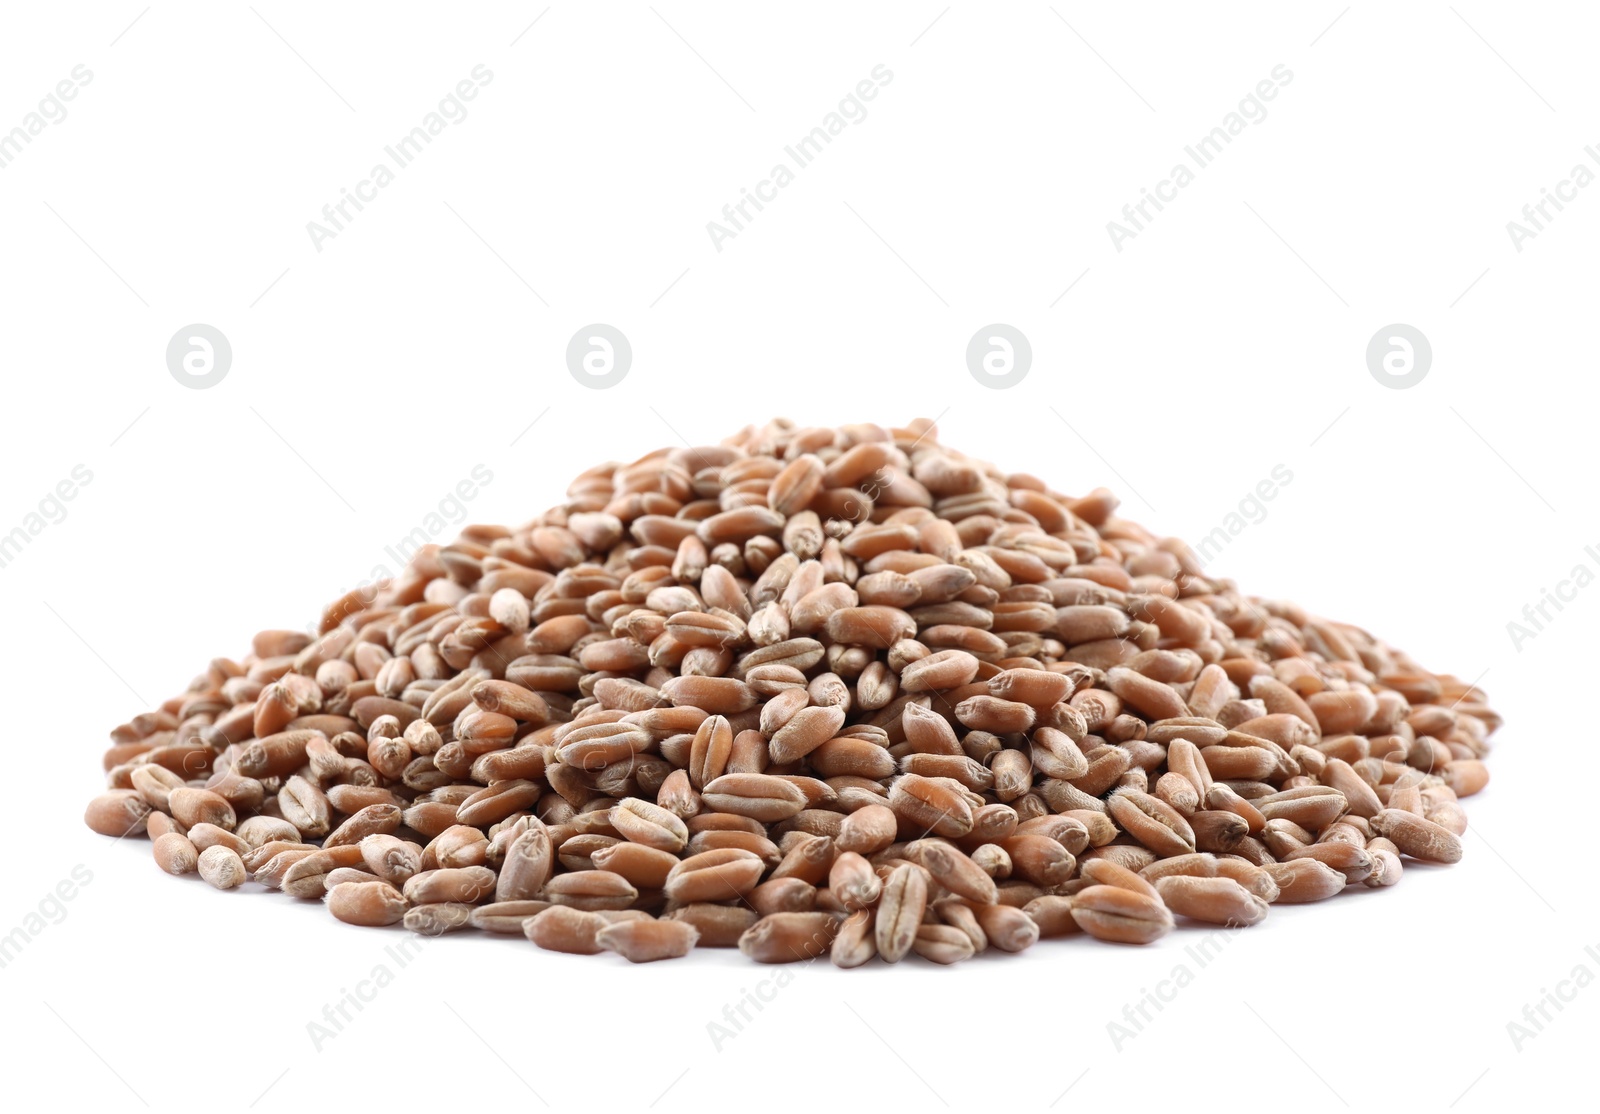 Photo of Pile of wheat grains isolated on white